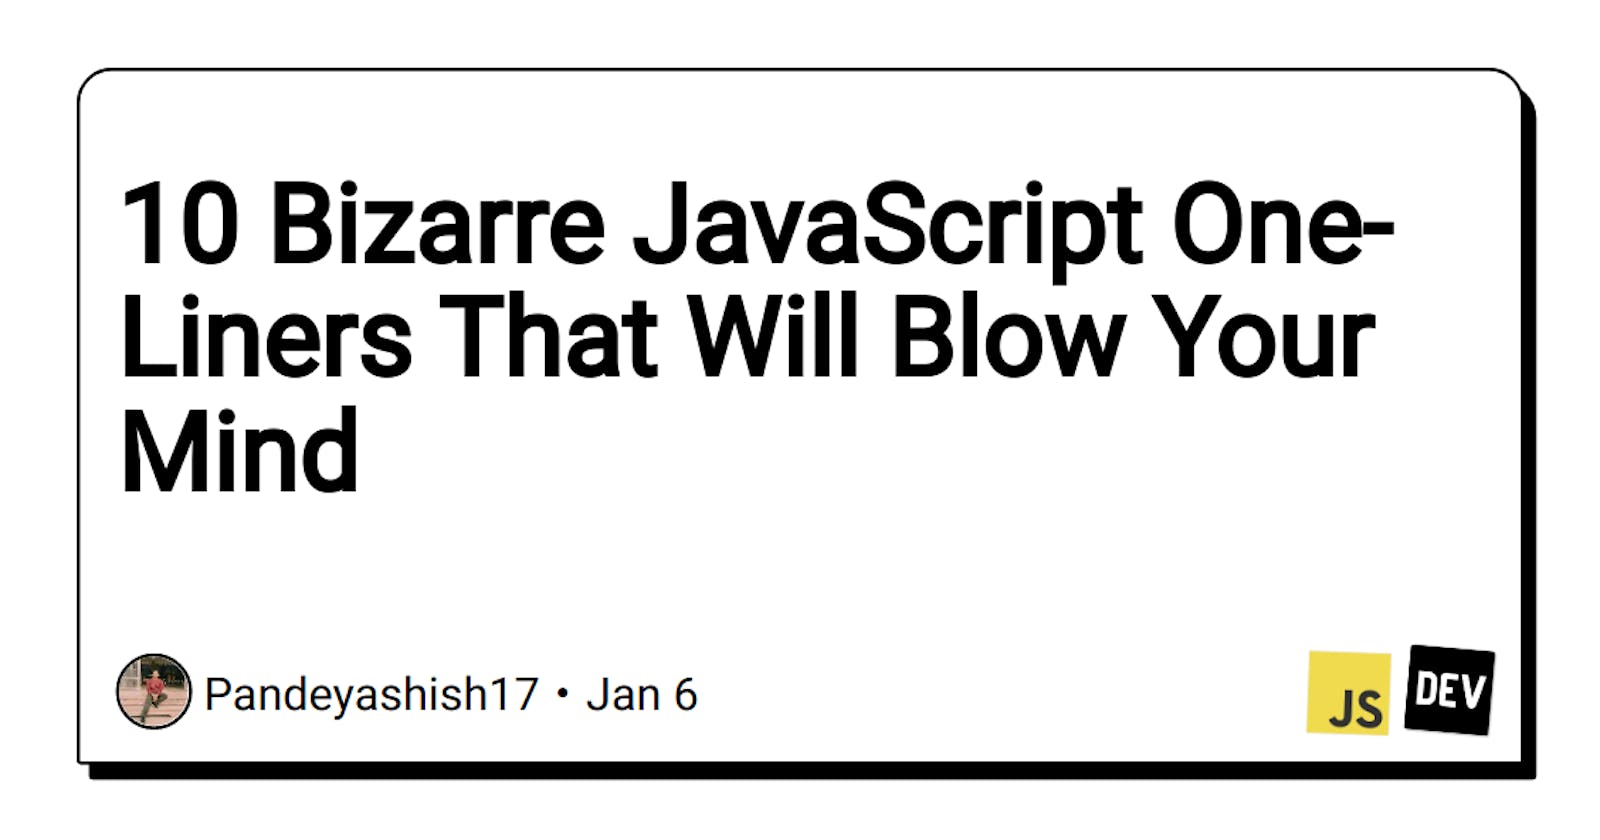 10 Bizarre JavaScript One-Liners That Will Blow Your Mind